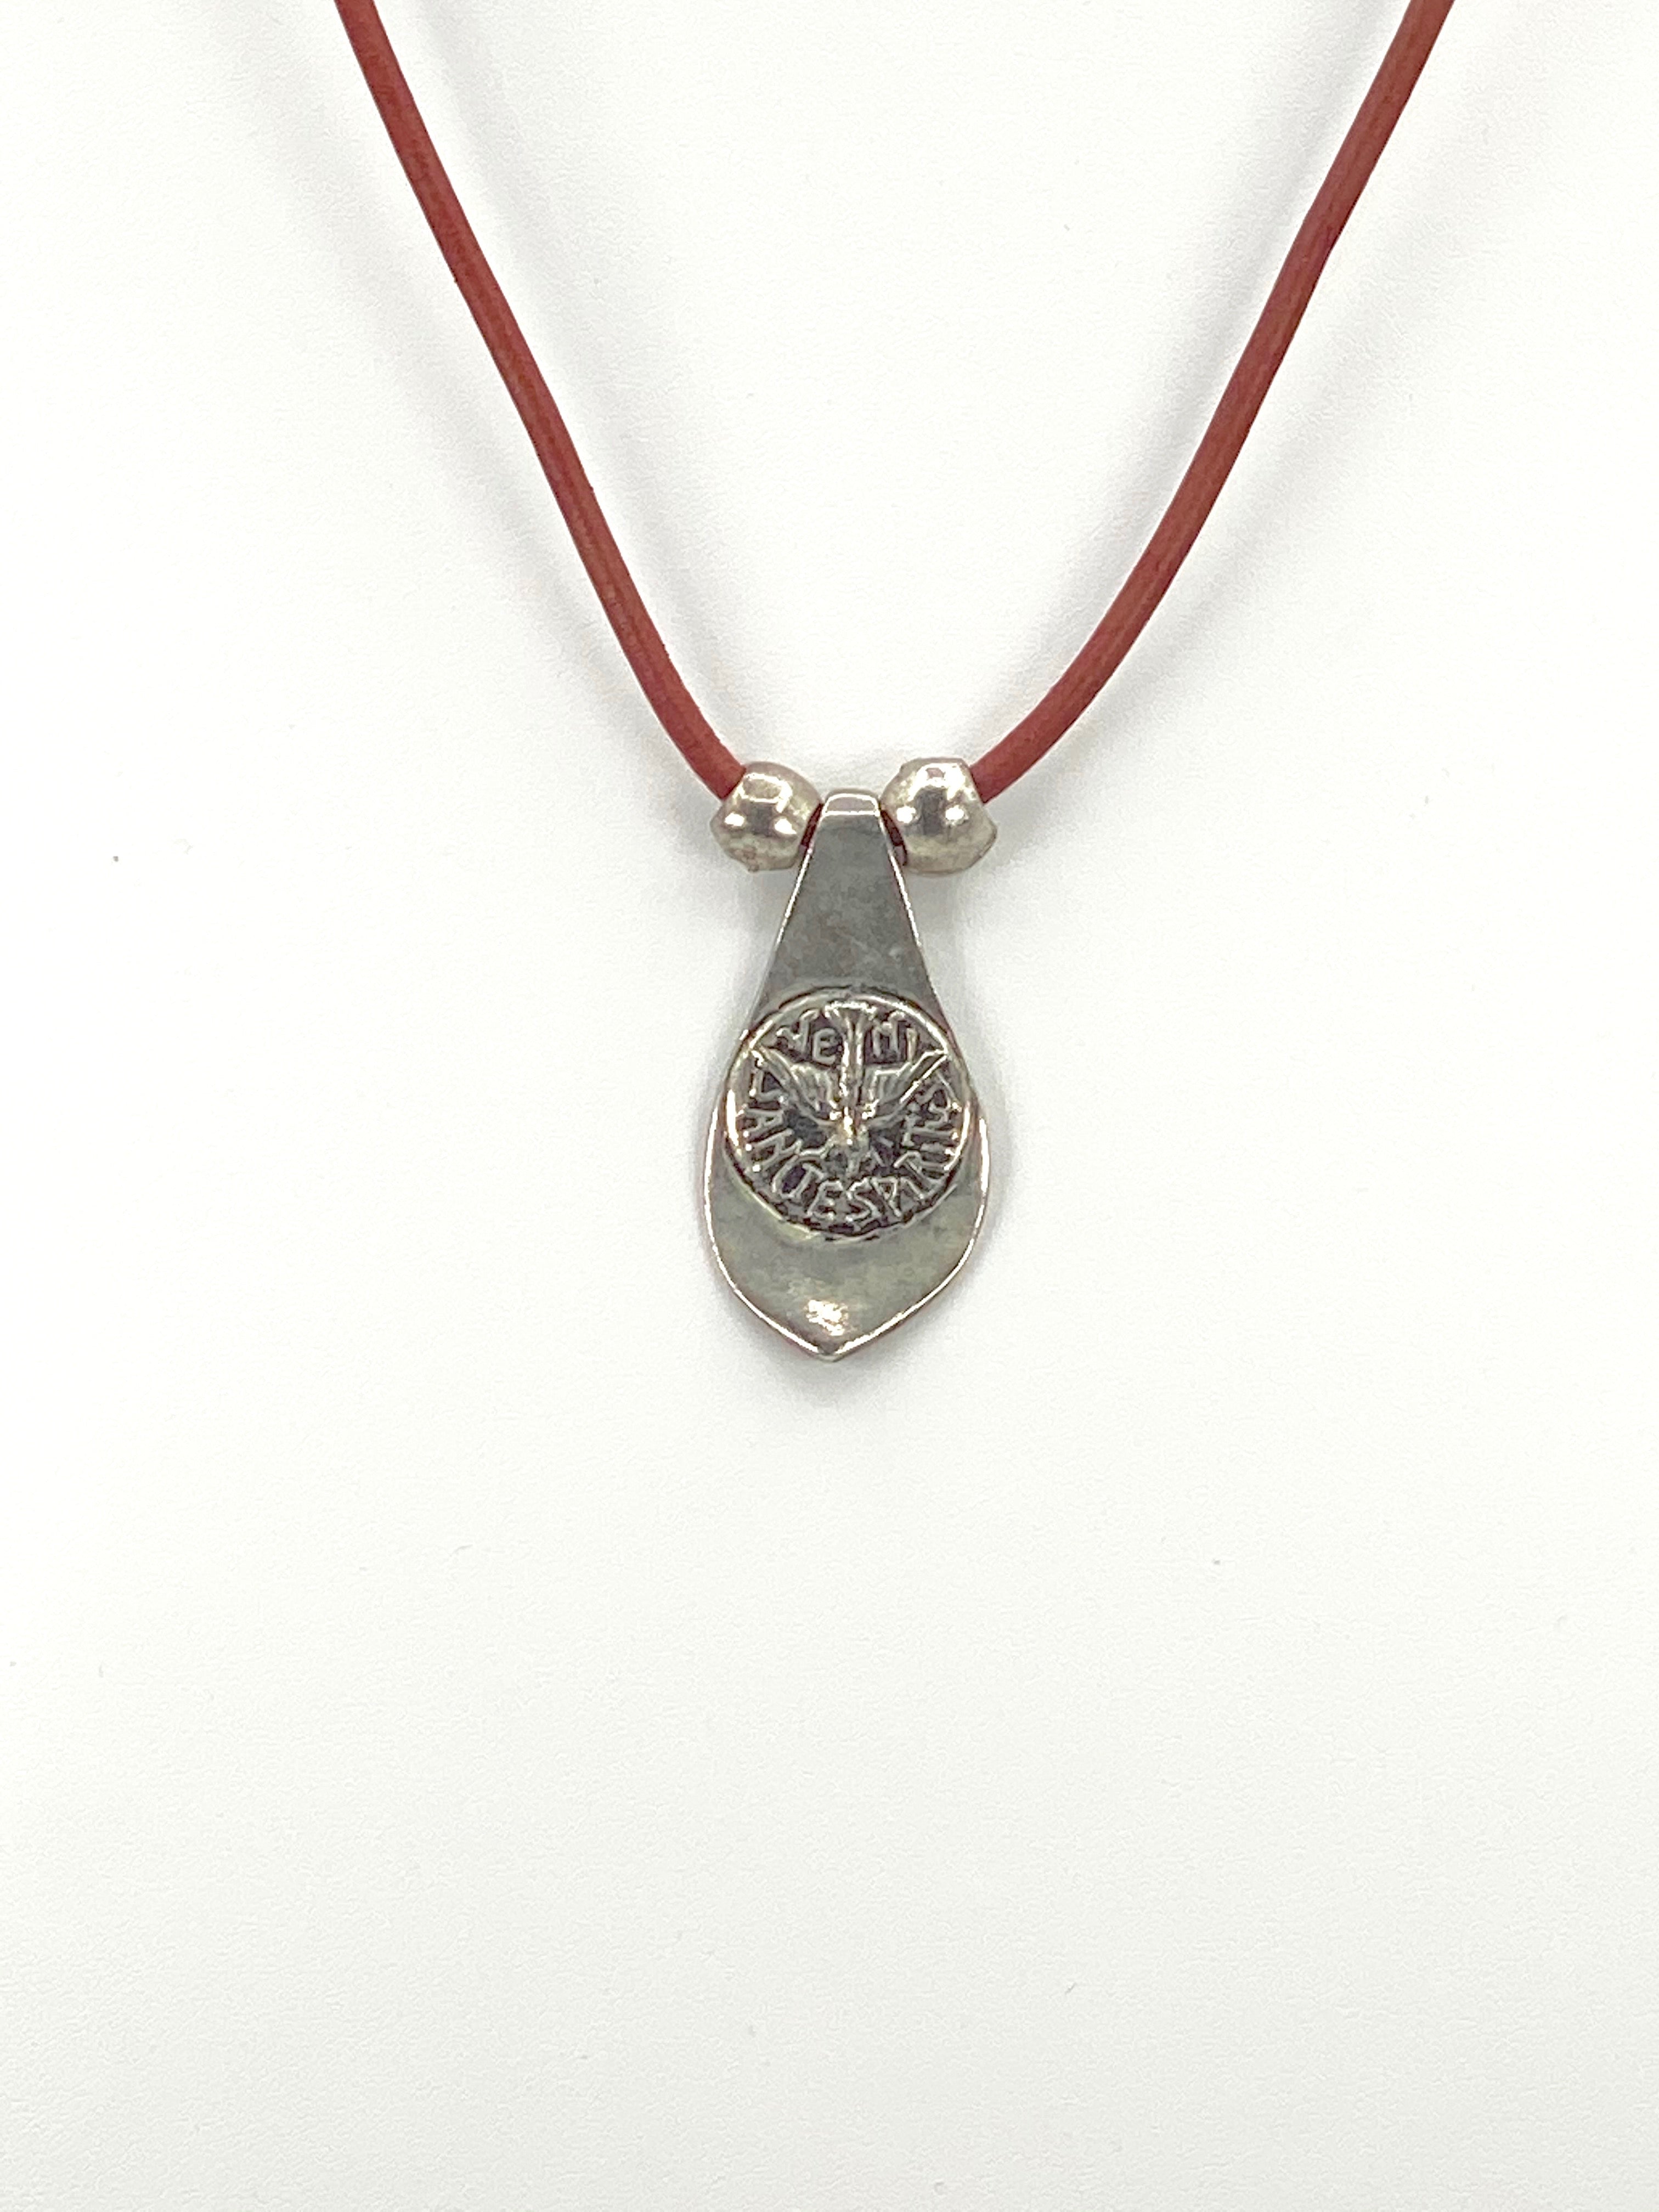 Vintage The Holy Spirit Necklace Handmade Jewelry with Genuine Leather Stap by Graciela's Collection